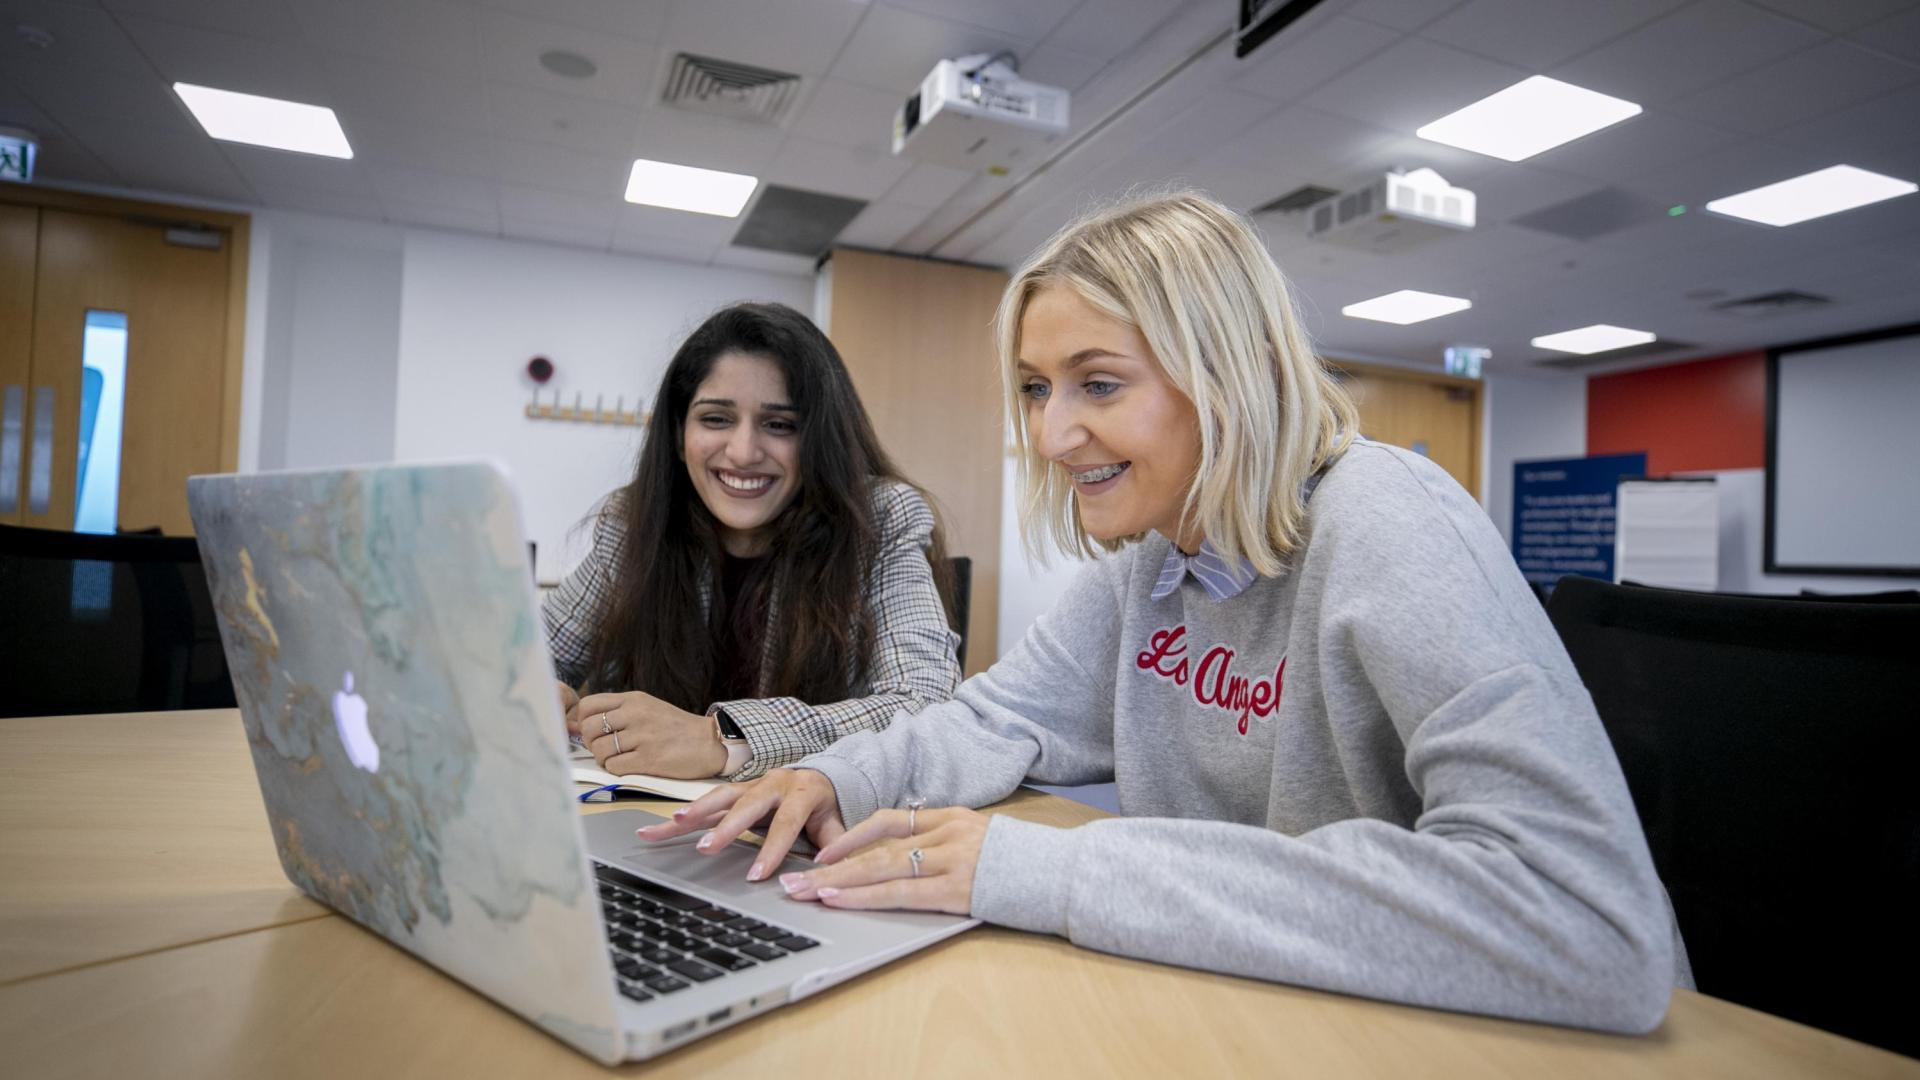 Shows two female students with laptop